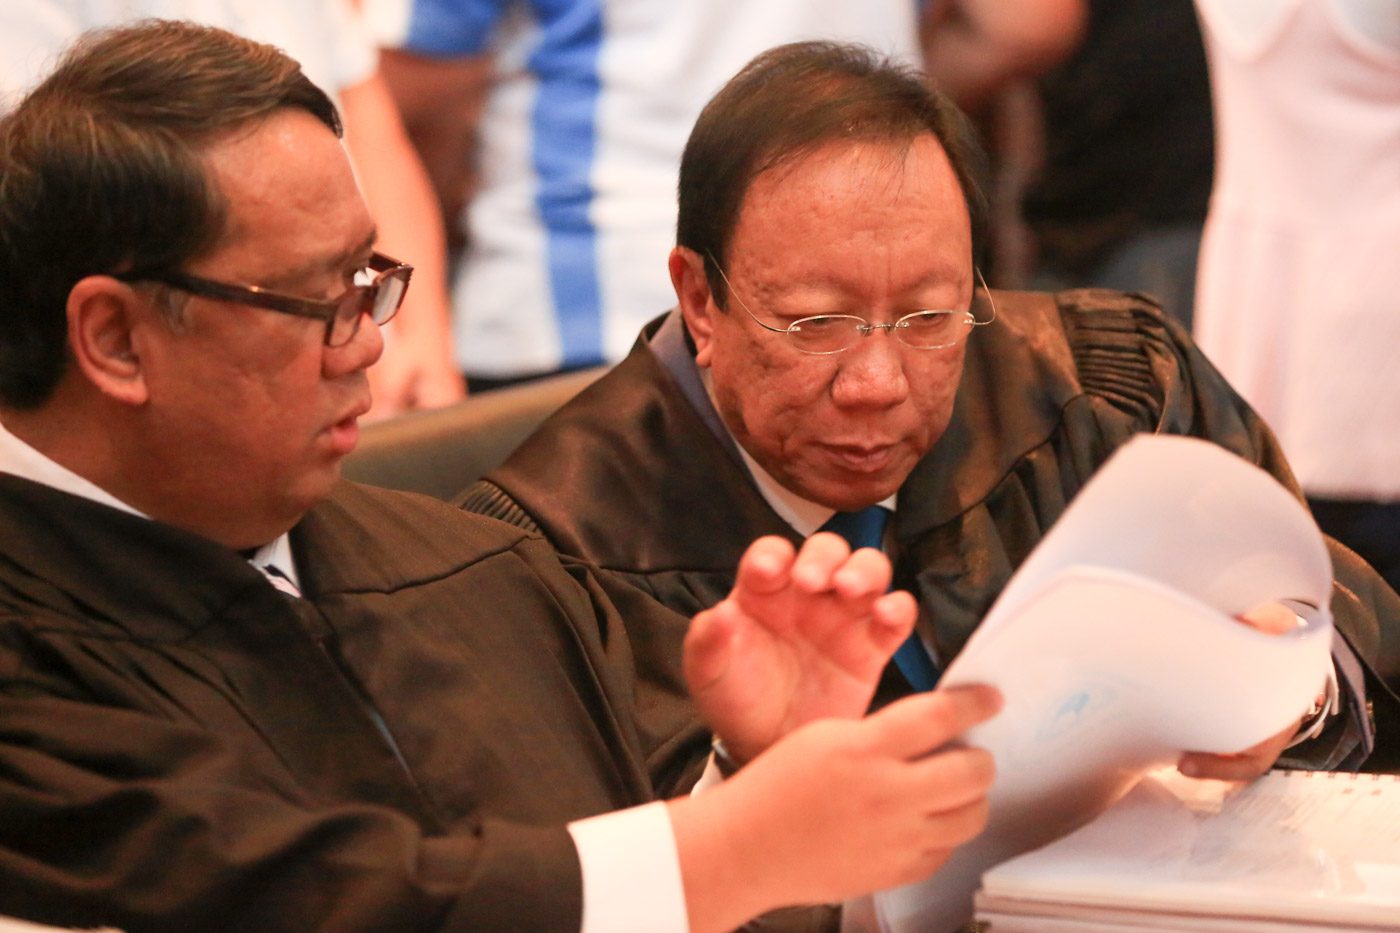 Will you know if you’re on a drug list? Not that easy, Calida says